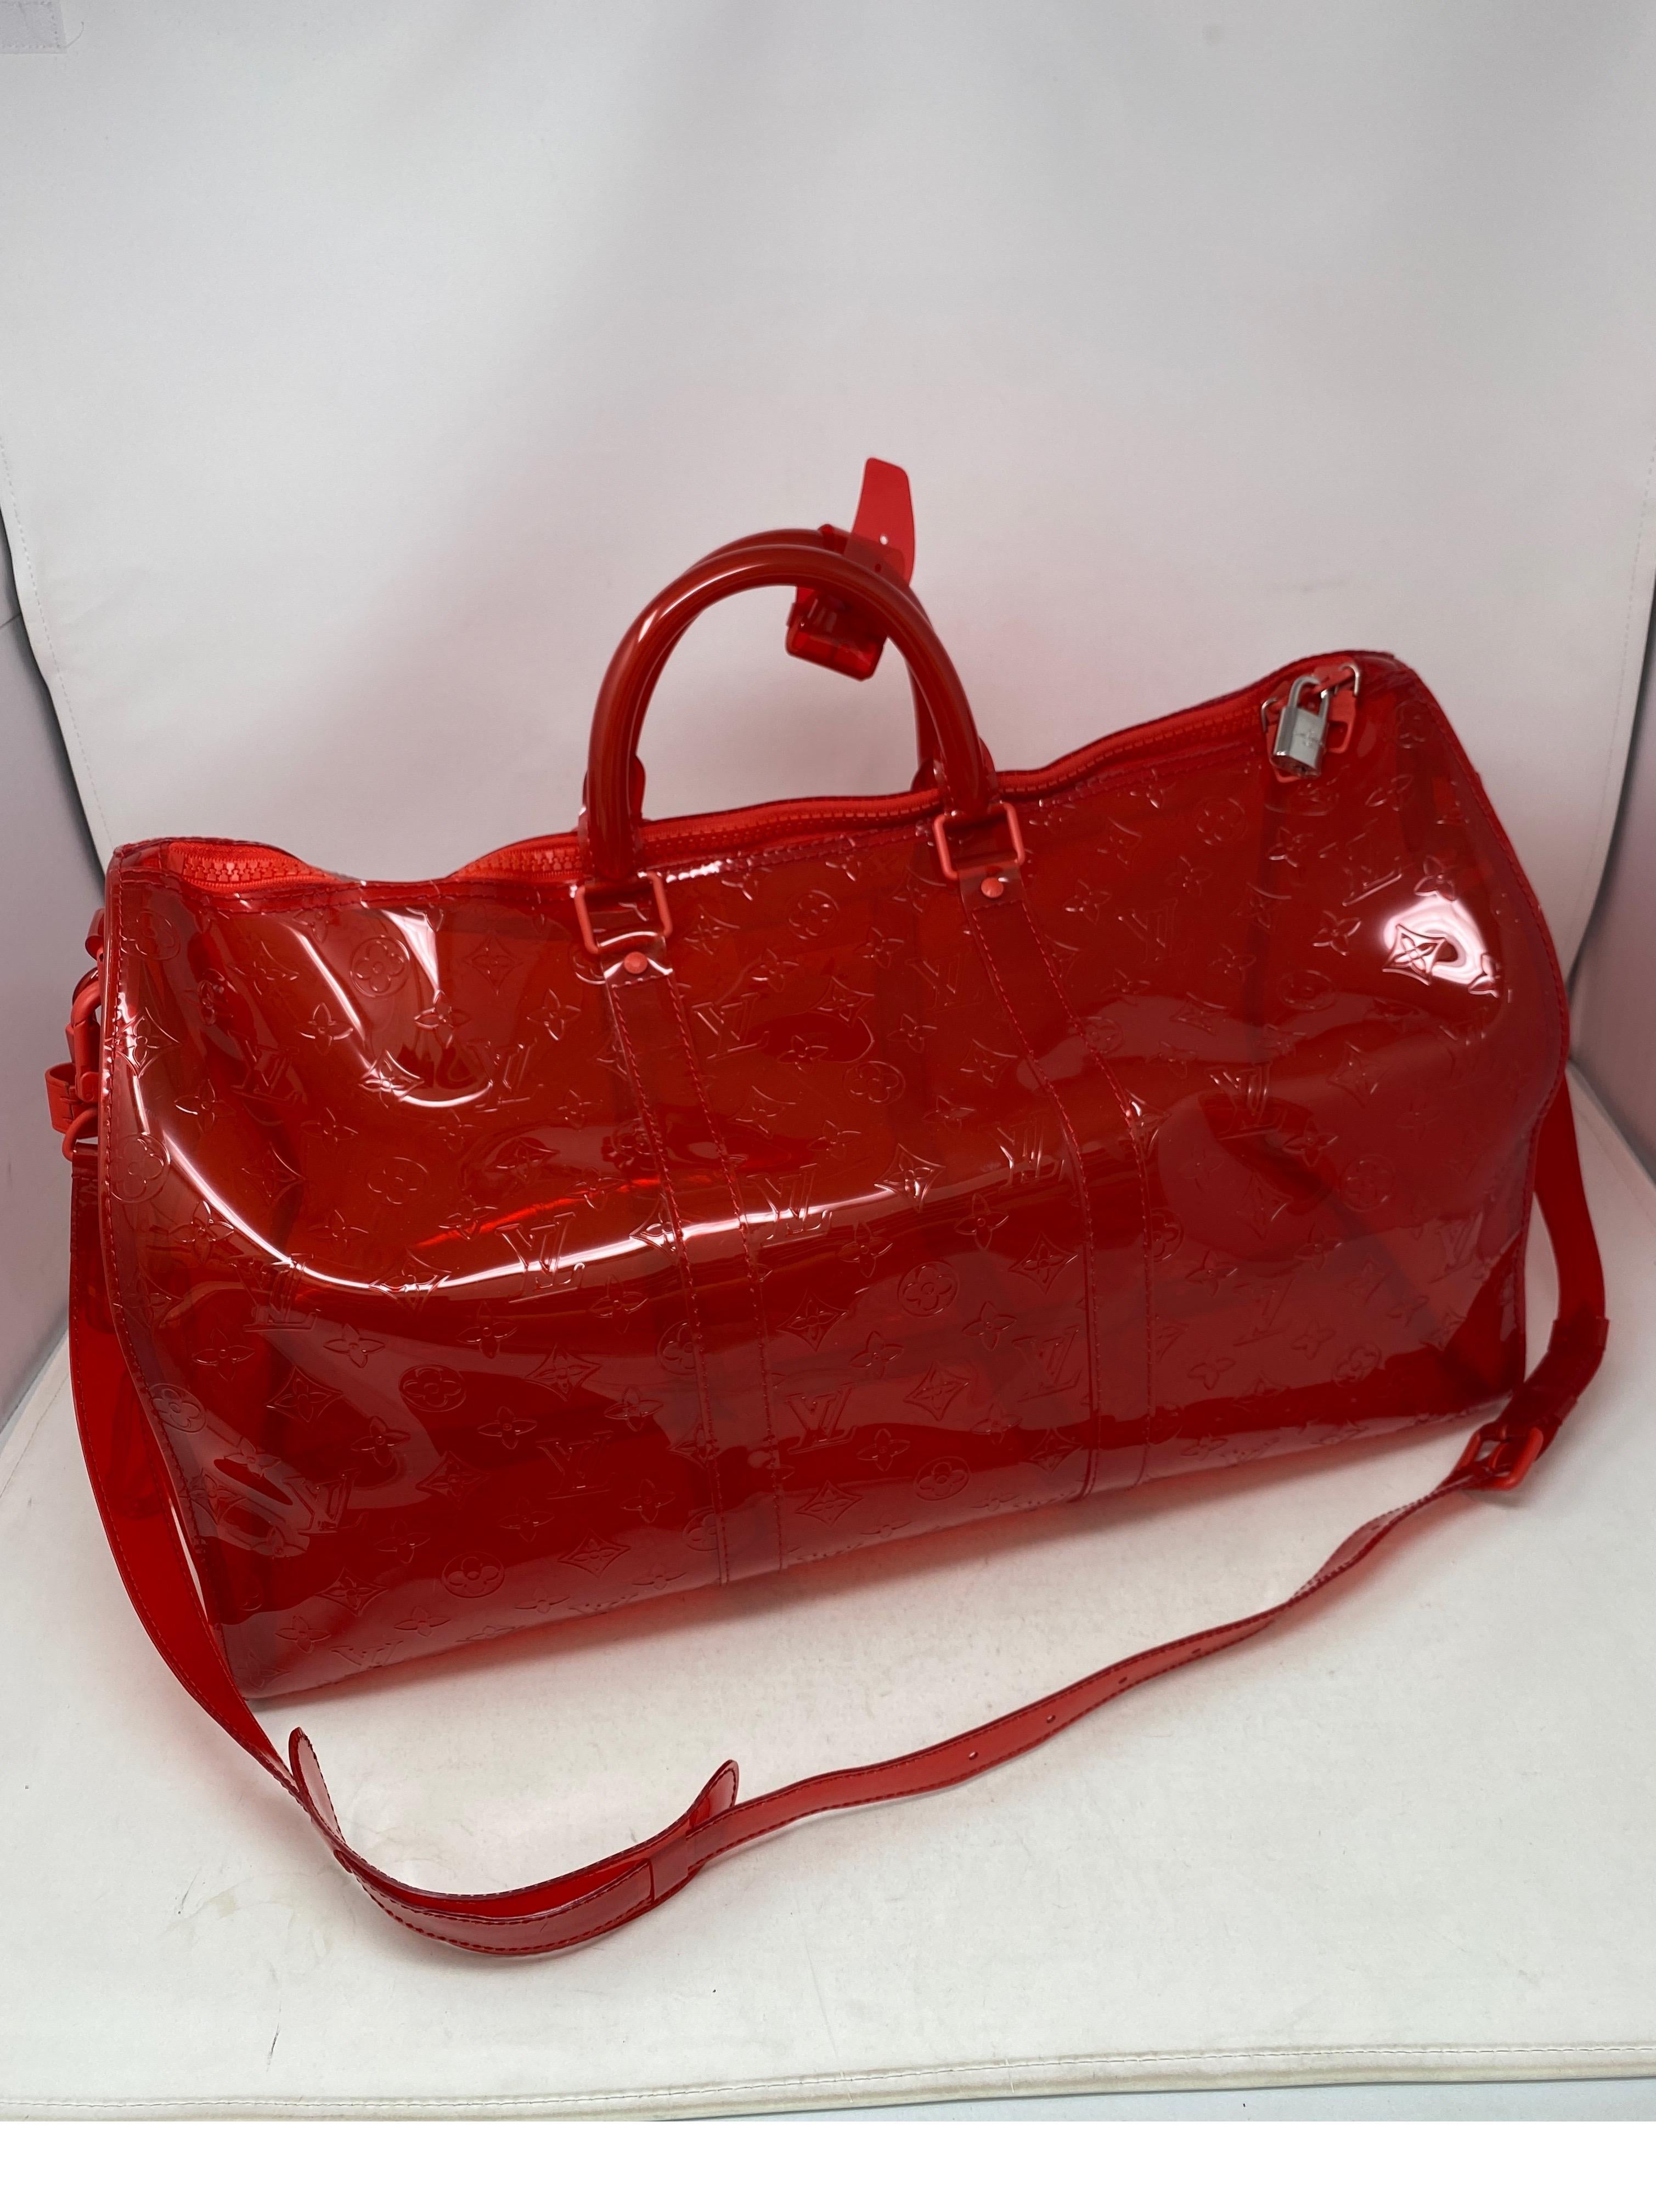 Louis Vuitton Virgil Abloh Red Vinyl Keepall Bandouliere Bag. Rare and limited edition. Clear red plastic travel bag by Virgil. Iconic design meets best of street casual. Collector's piece. Don't miss out. Guaranteed authentic. 